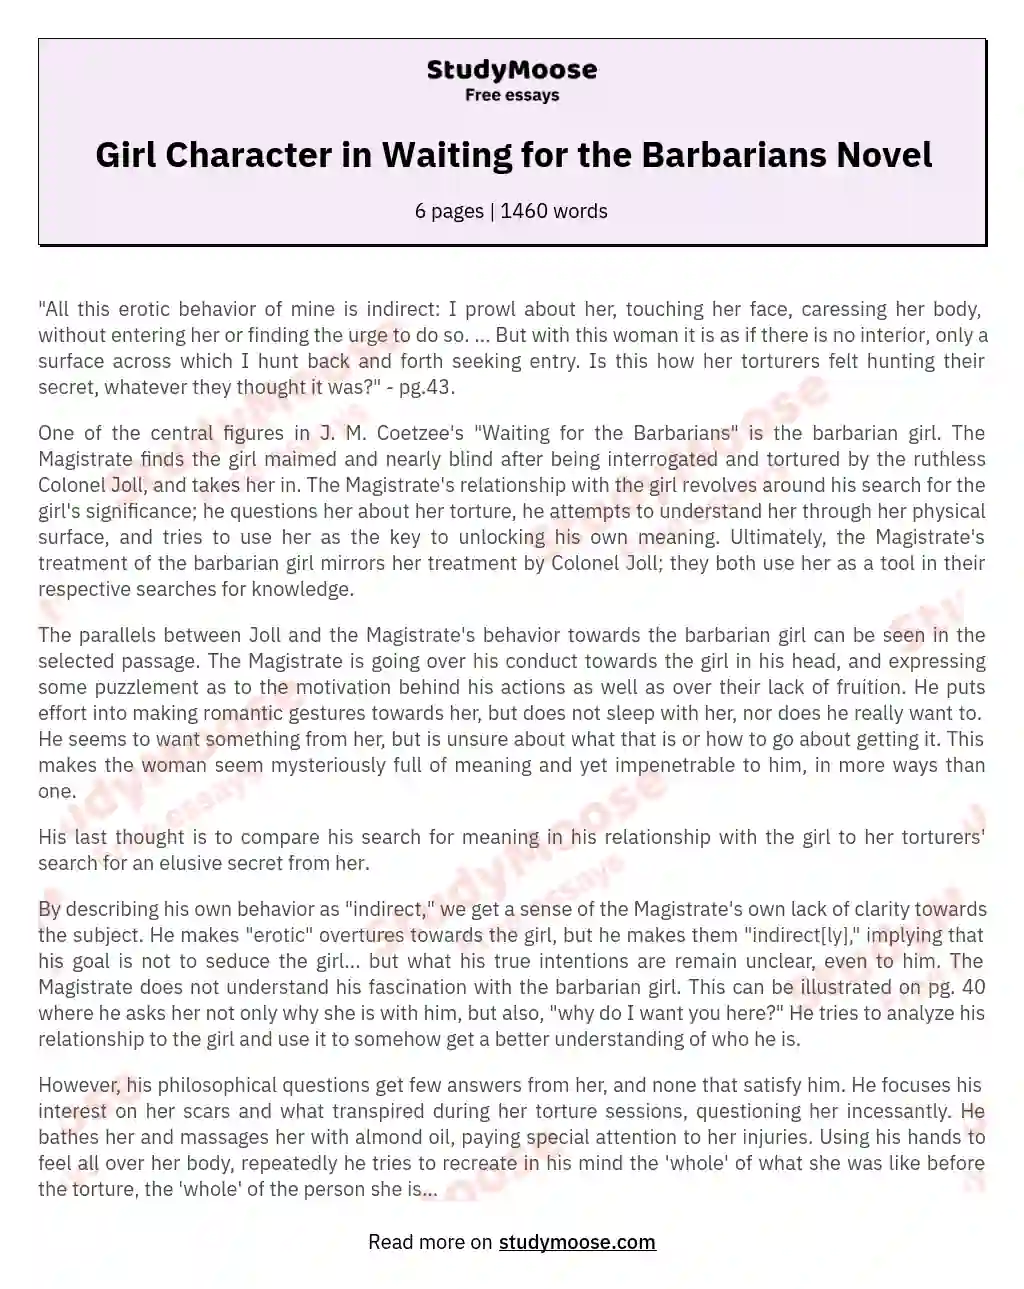 Girl Character in Waiting for the Barbarians Novel